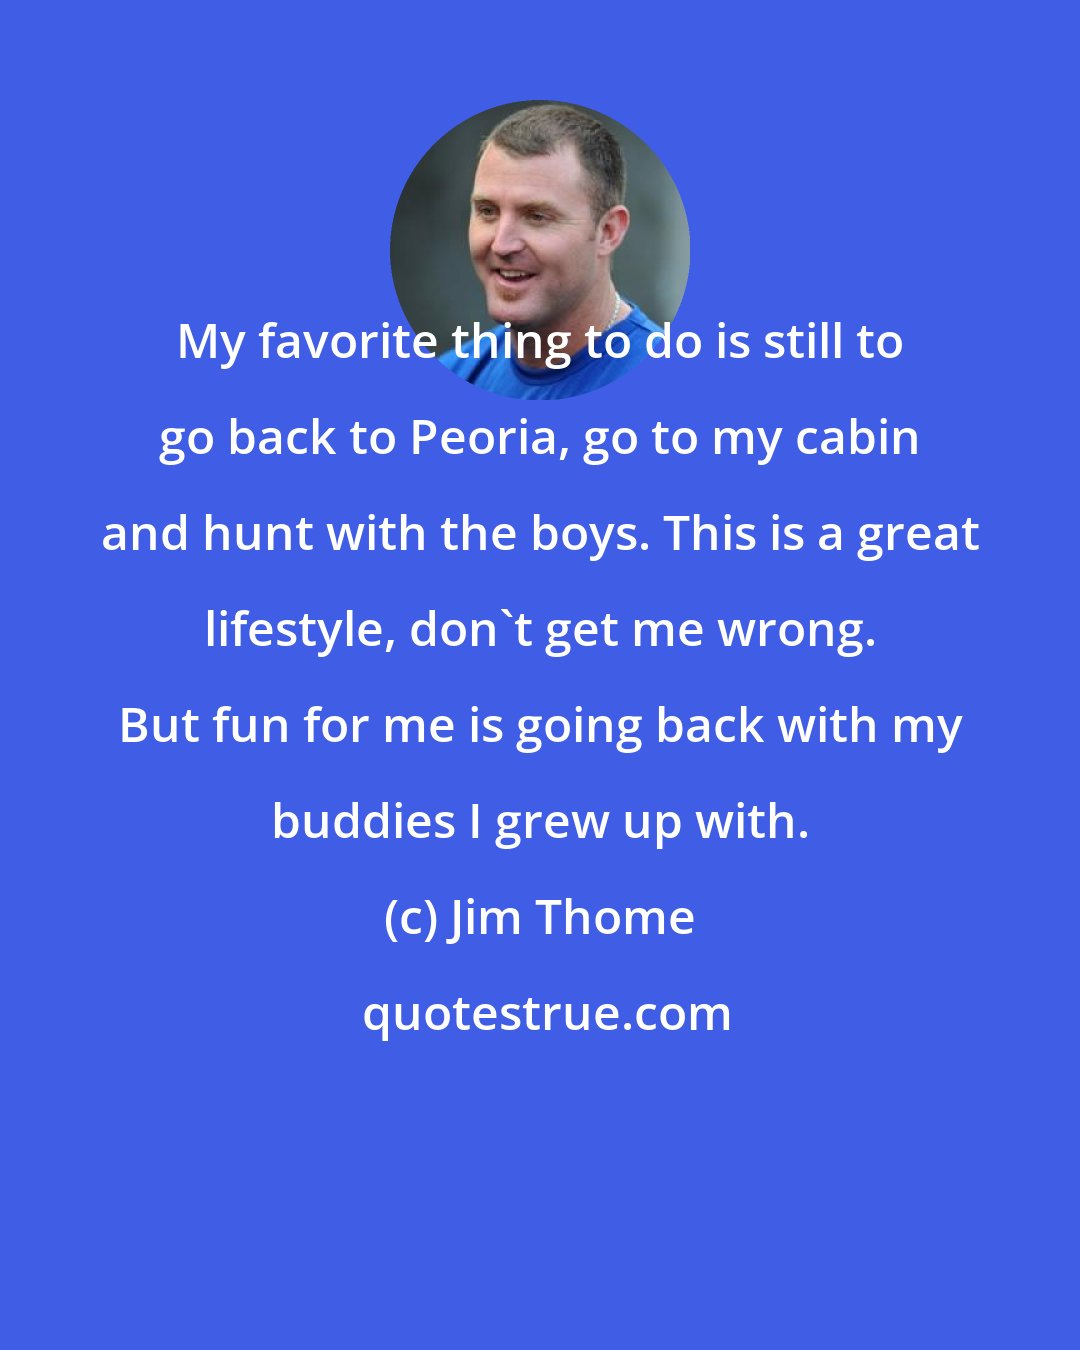 Jim Thome: My favorite thing to do is still to go back to Peoria, go to my cabin and hunt with the boys. This is a great lifestyle, don't get me wrong. But fun for me is going back with my buddies I grew up with.